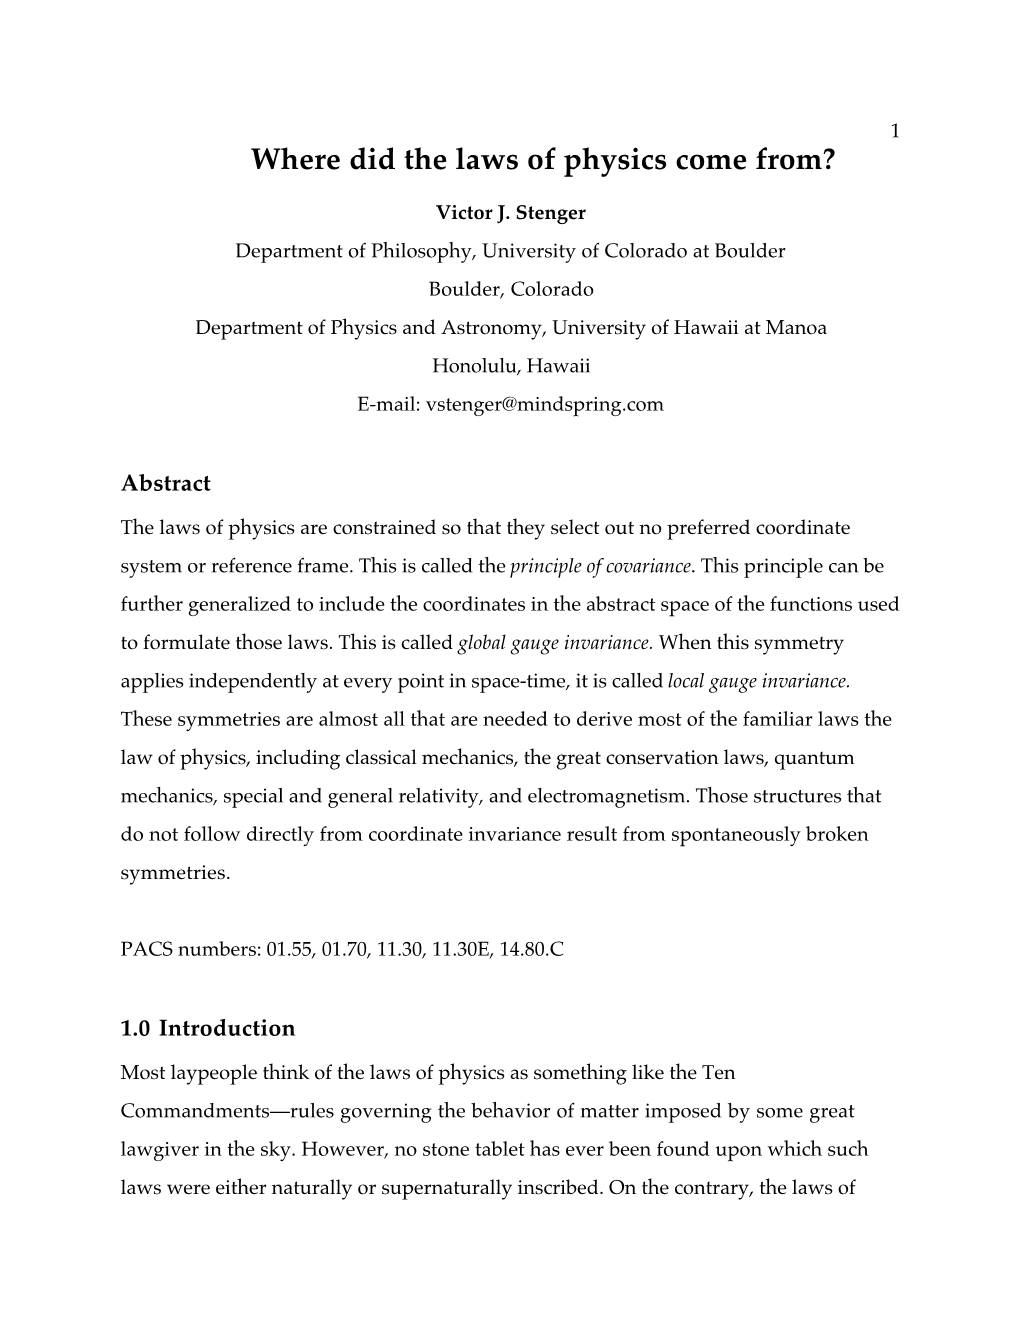 Where Did the Laws of Physics Come From?